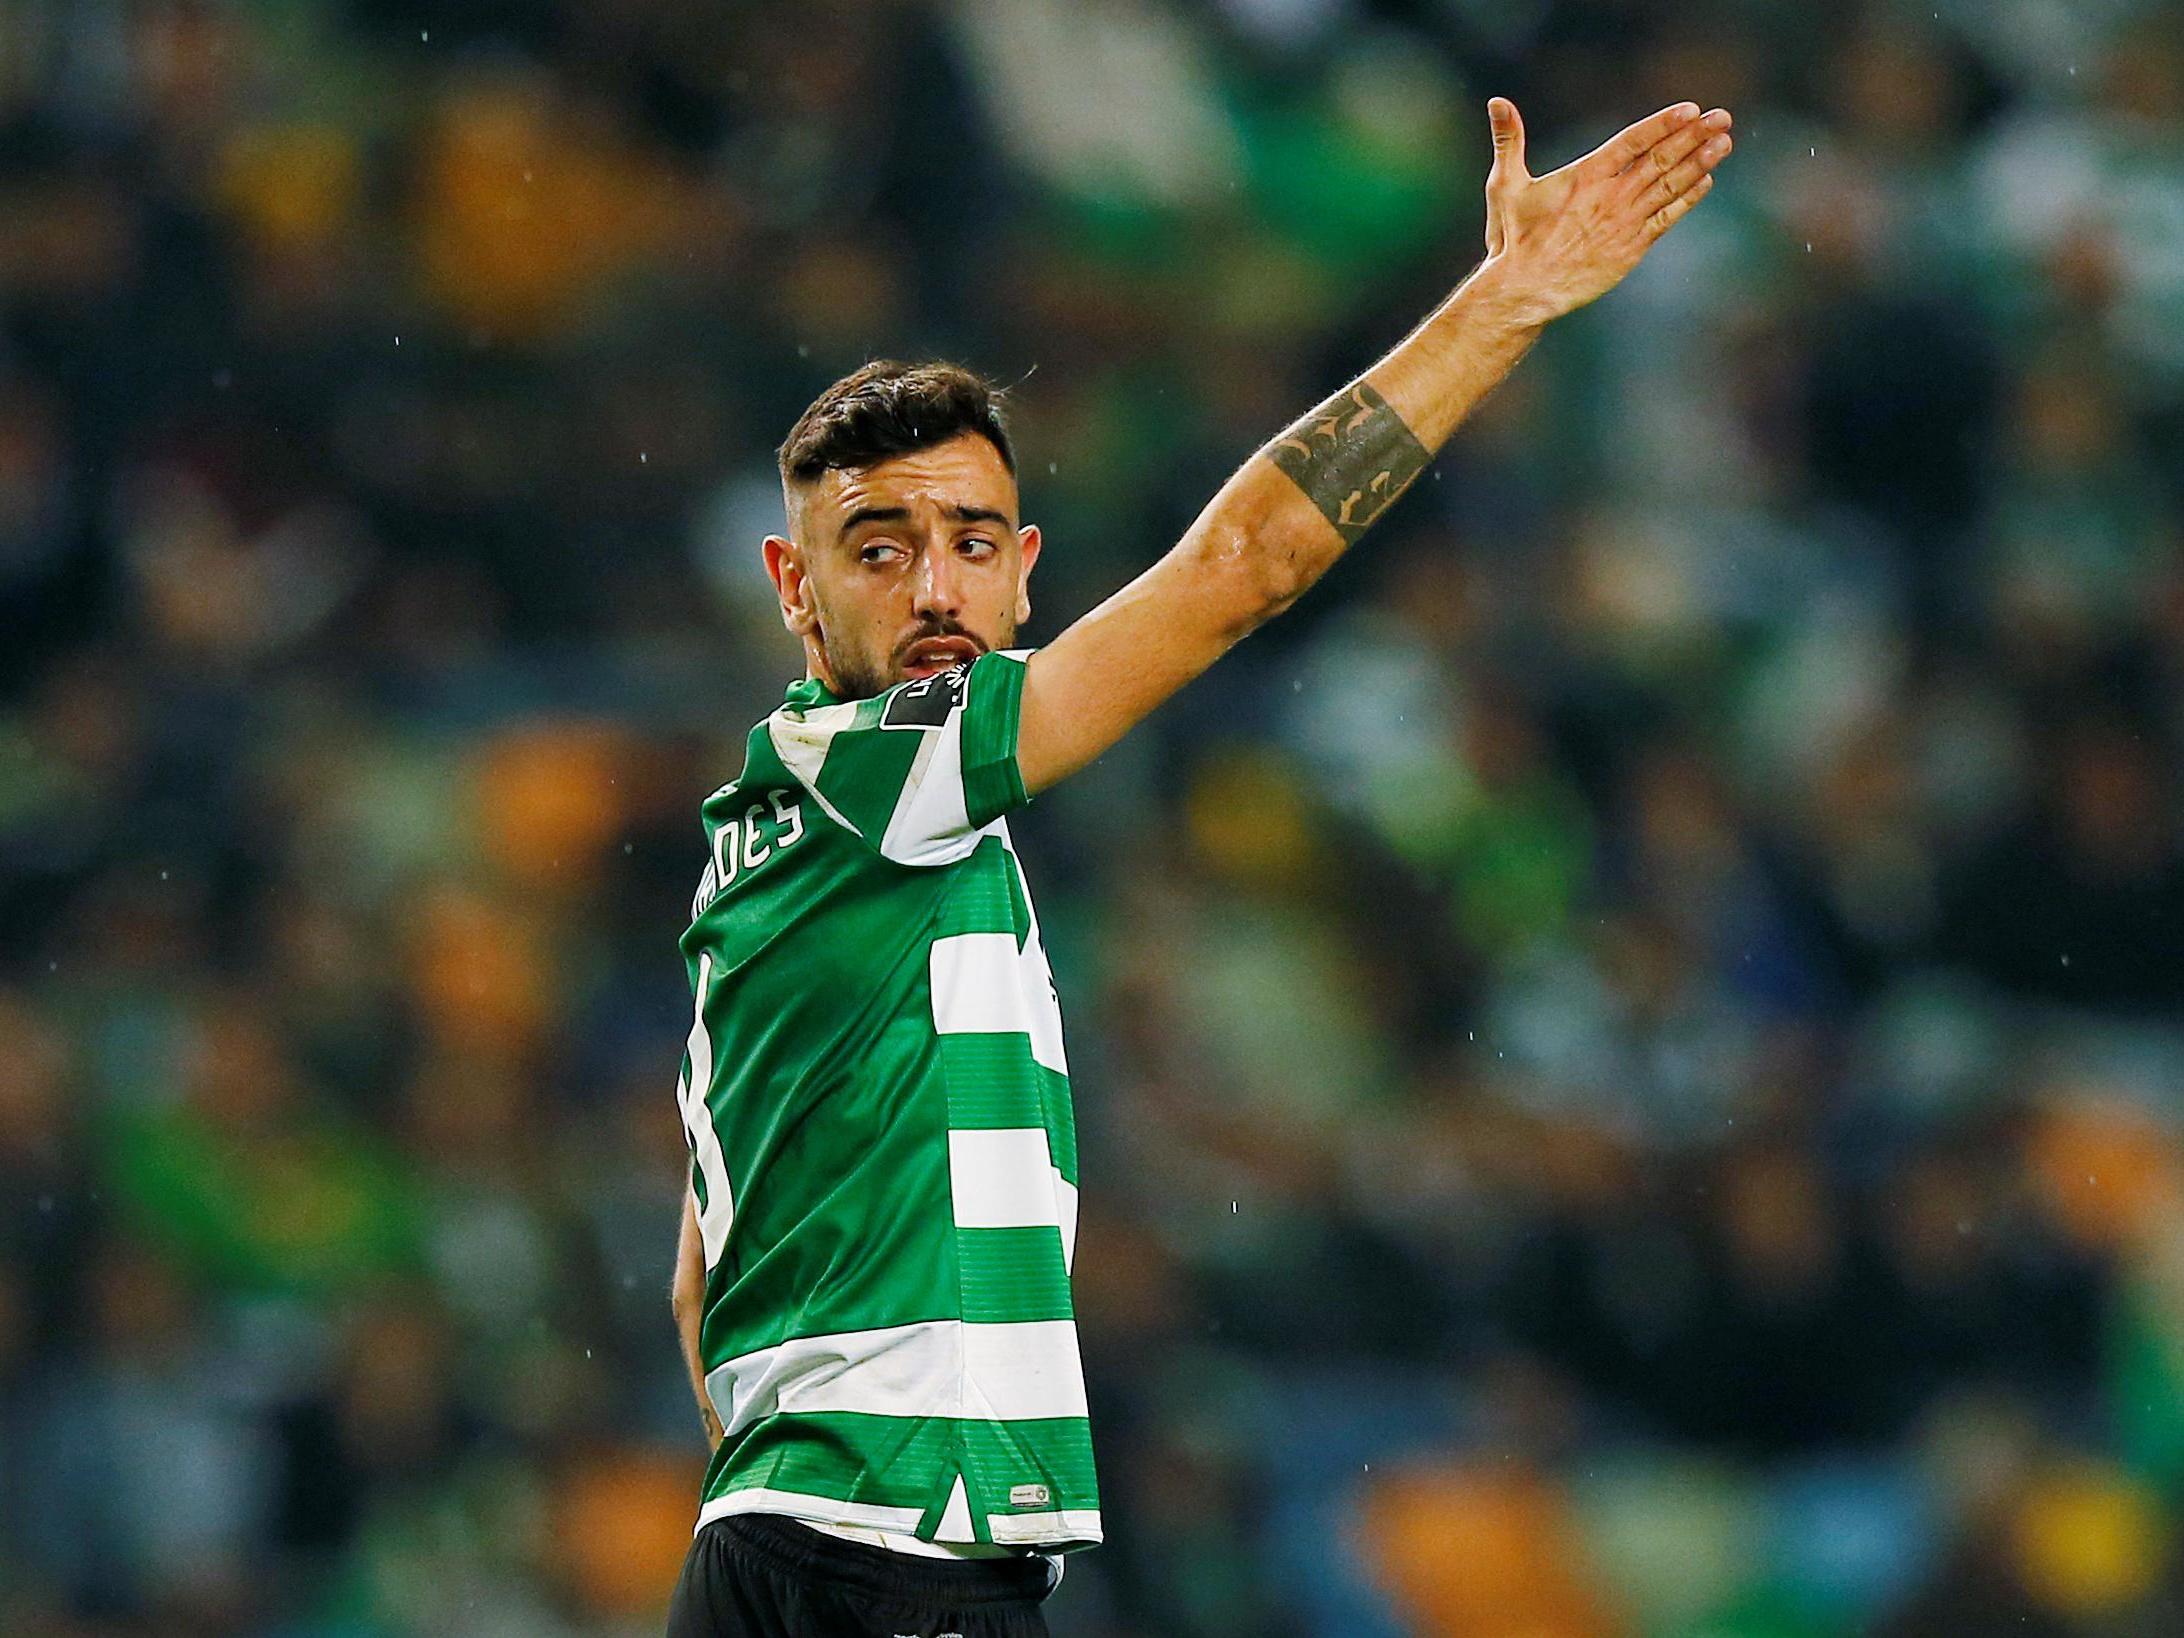 Bruno Fernandes has been the outstanding player in Portugal in recent years